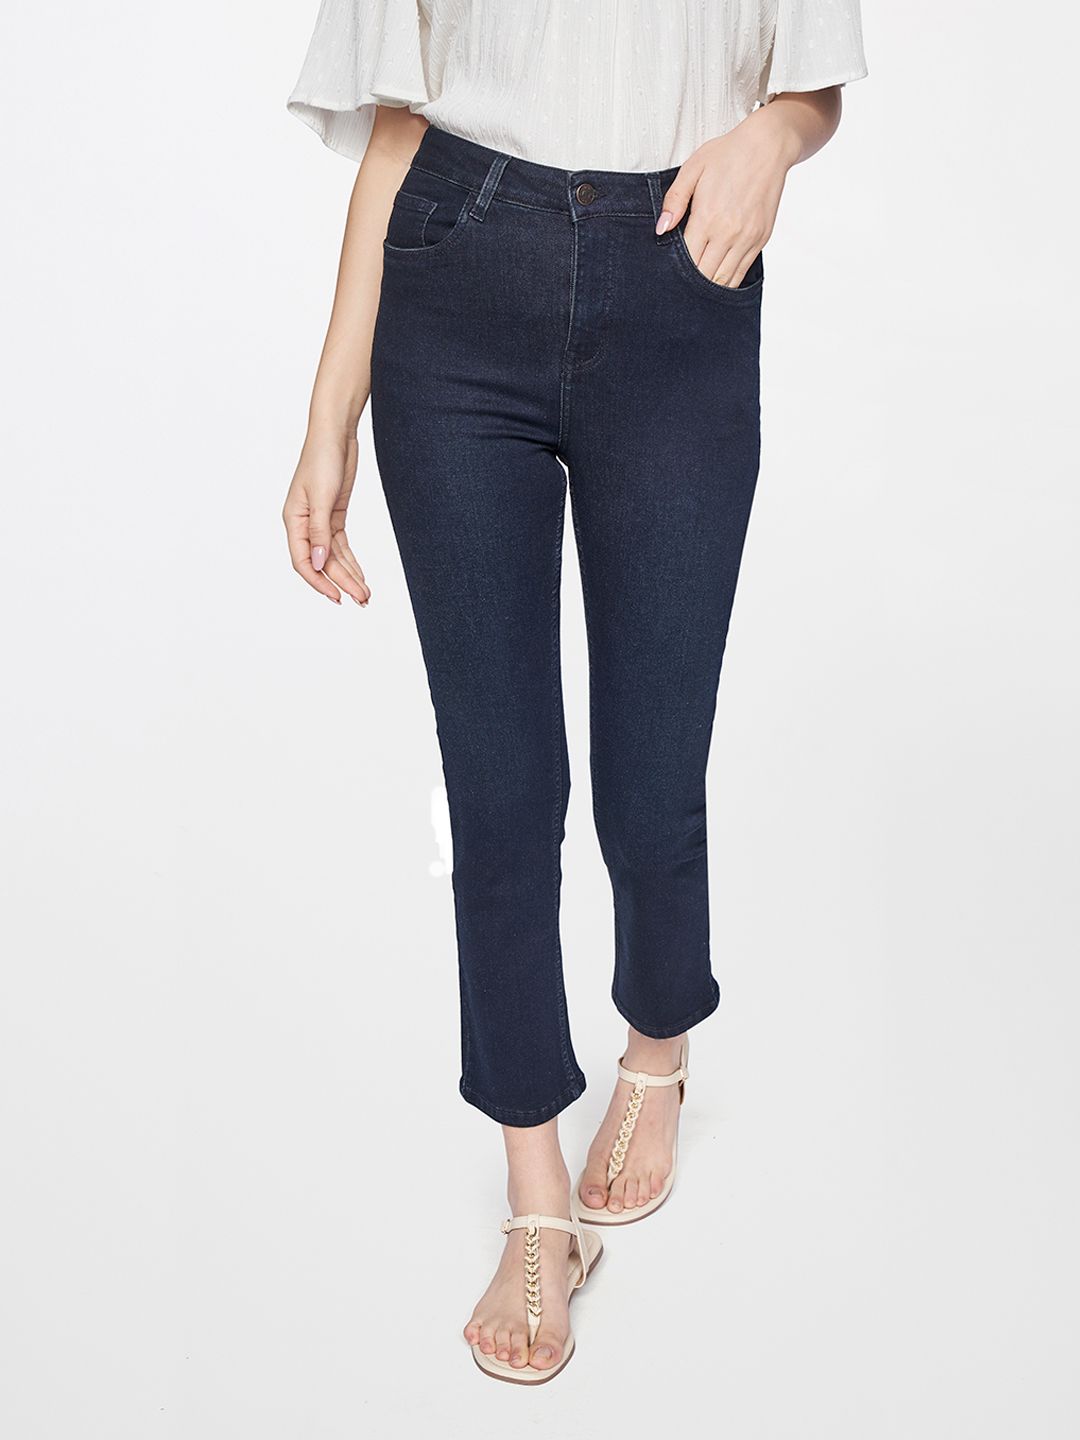 AND Women Blue Straight Fit Jeans Price in India